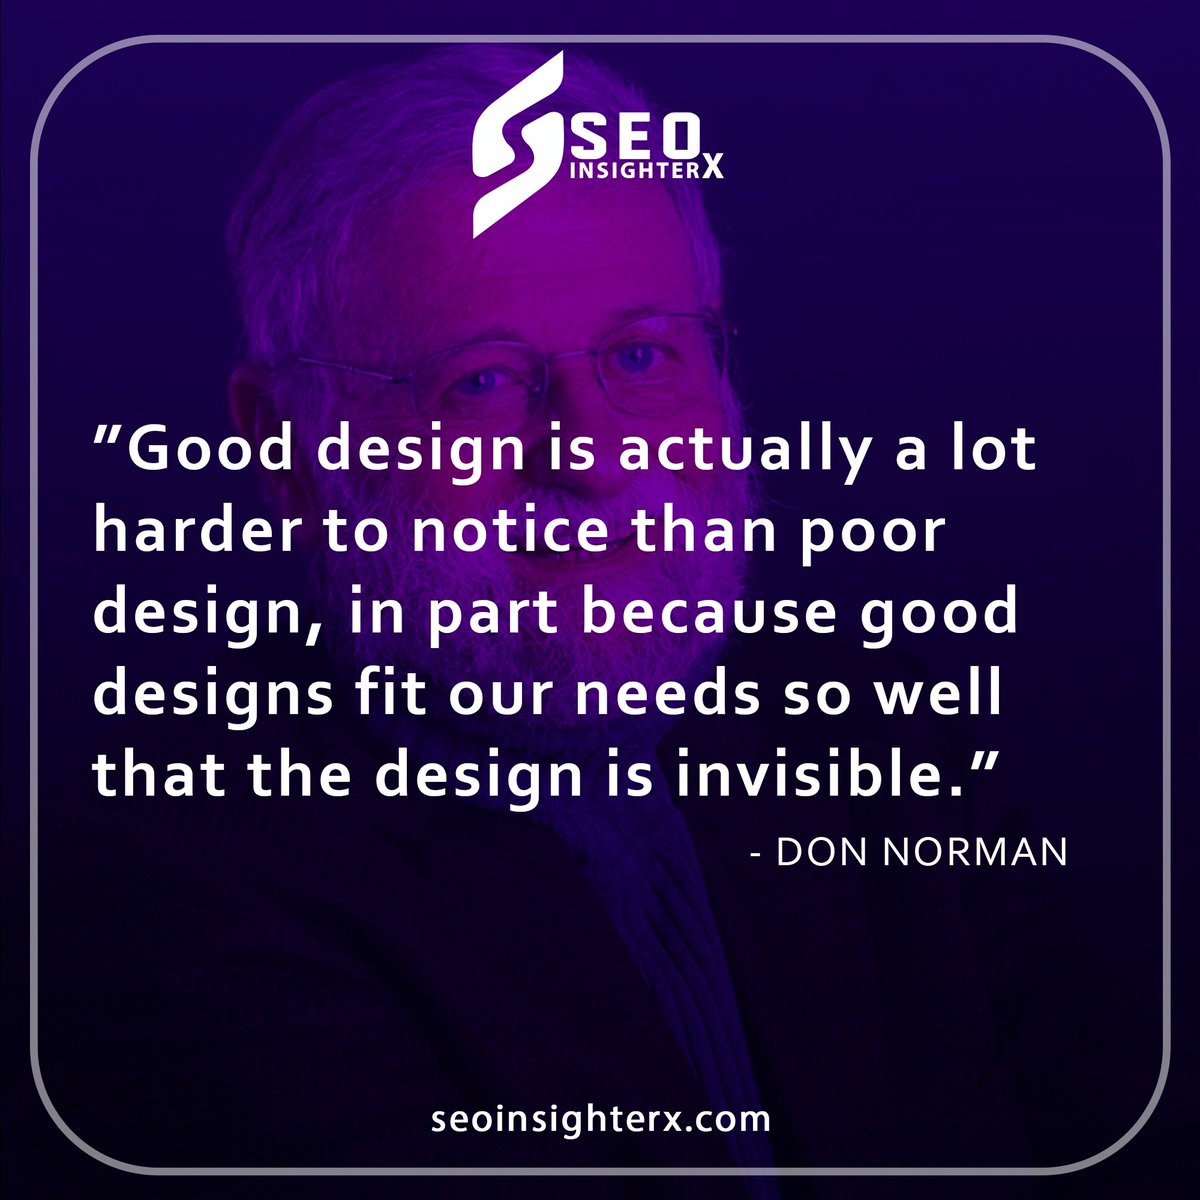 'Good design is actually a lot harder to notice than poor design, in part because good designs fit our needs so well that the design is invisible.'
.
𝐂𝐨𝐧𝐭𝐚𝐜𝐭 𝐮𝐬 𝐟𝐨𝐫 𝐦𝐨𝐫𝐞 𝐃𝐞𝐭𝐚𝐢𝐥𝐬 Visit Our Website: seoinsighterx.com
.
#design #DONNORMAN #seoinsighterx